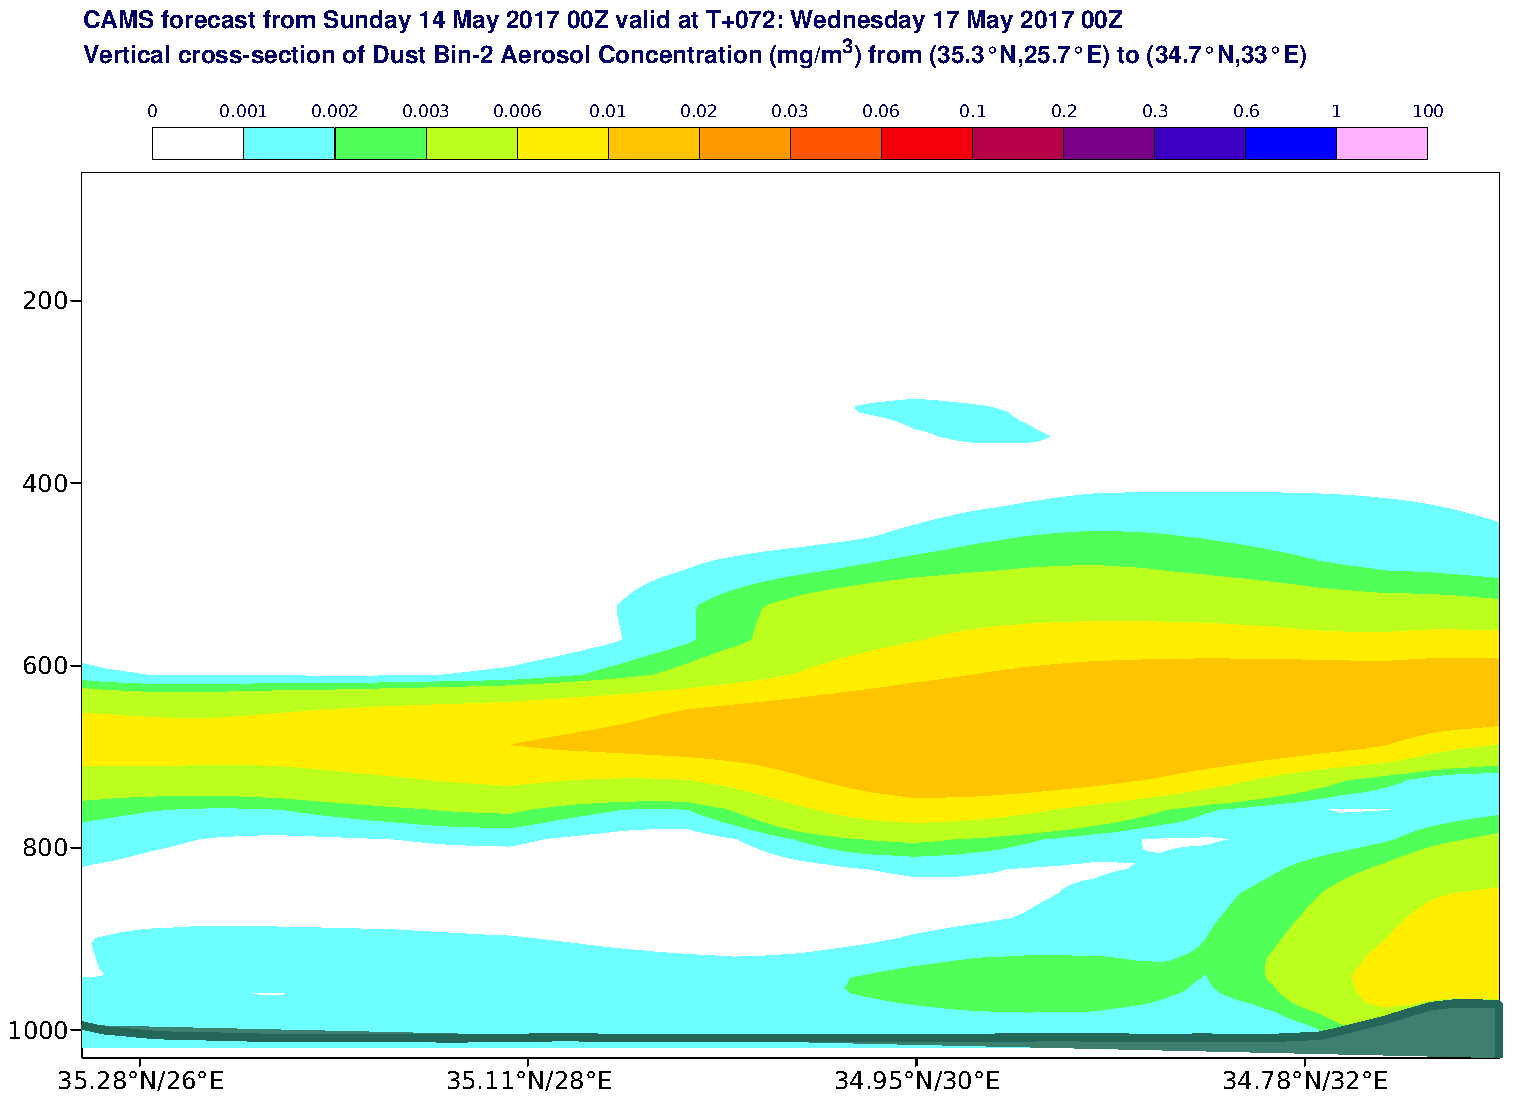 Vertical cross-section of Dust Bin-2 Aerosol Concentration (mg/m3) valid at T72 - 2017-05-17 00:00